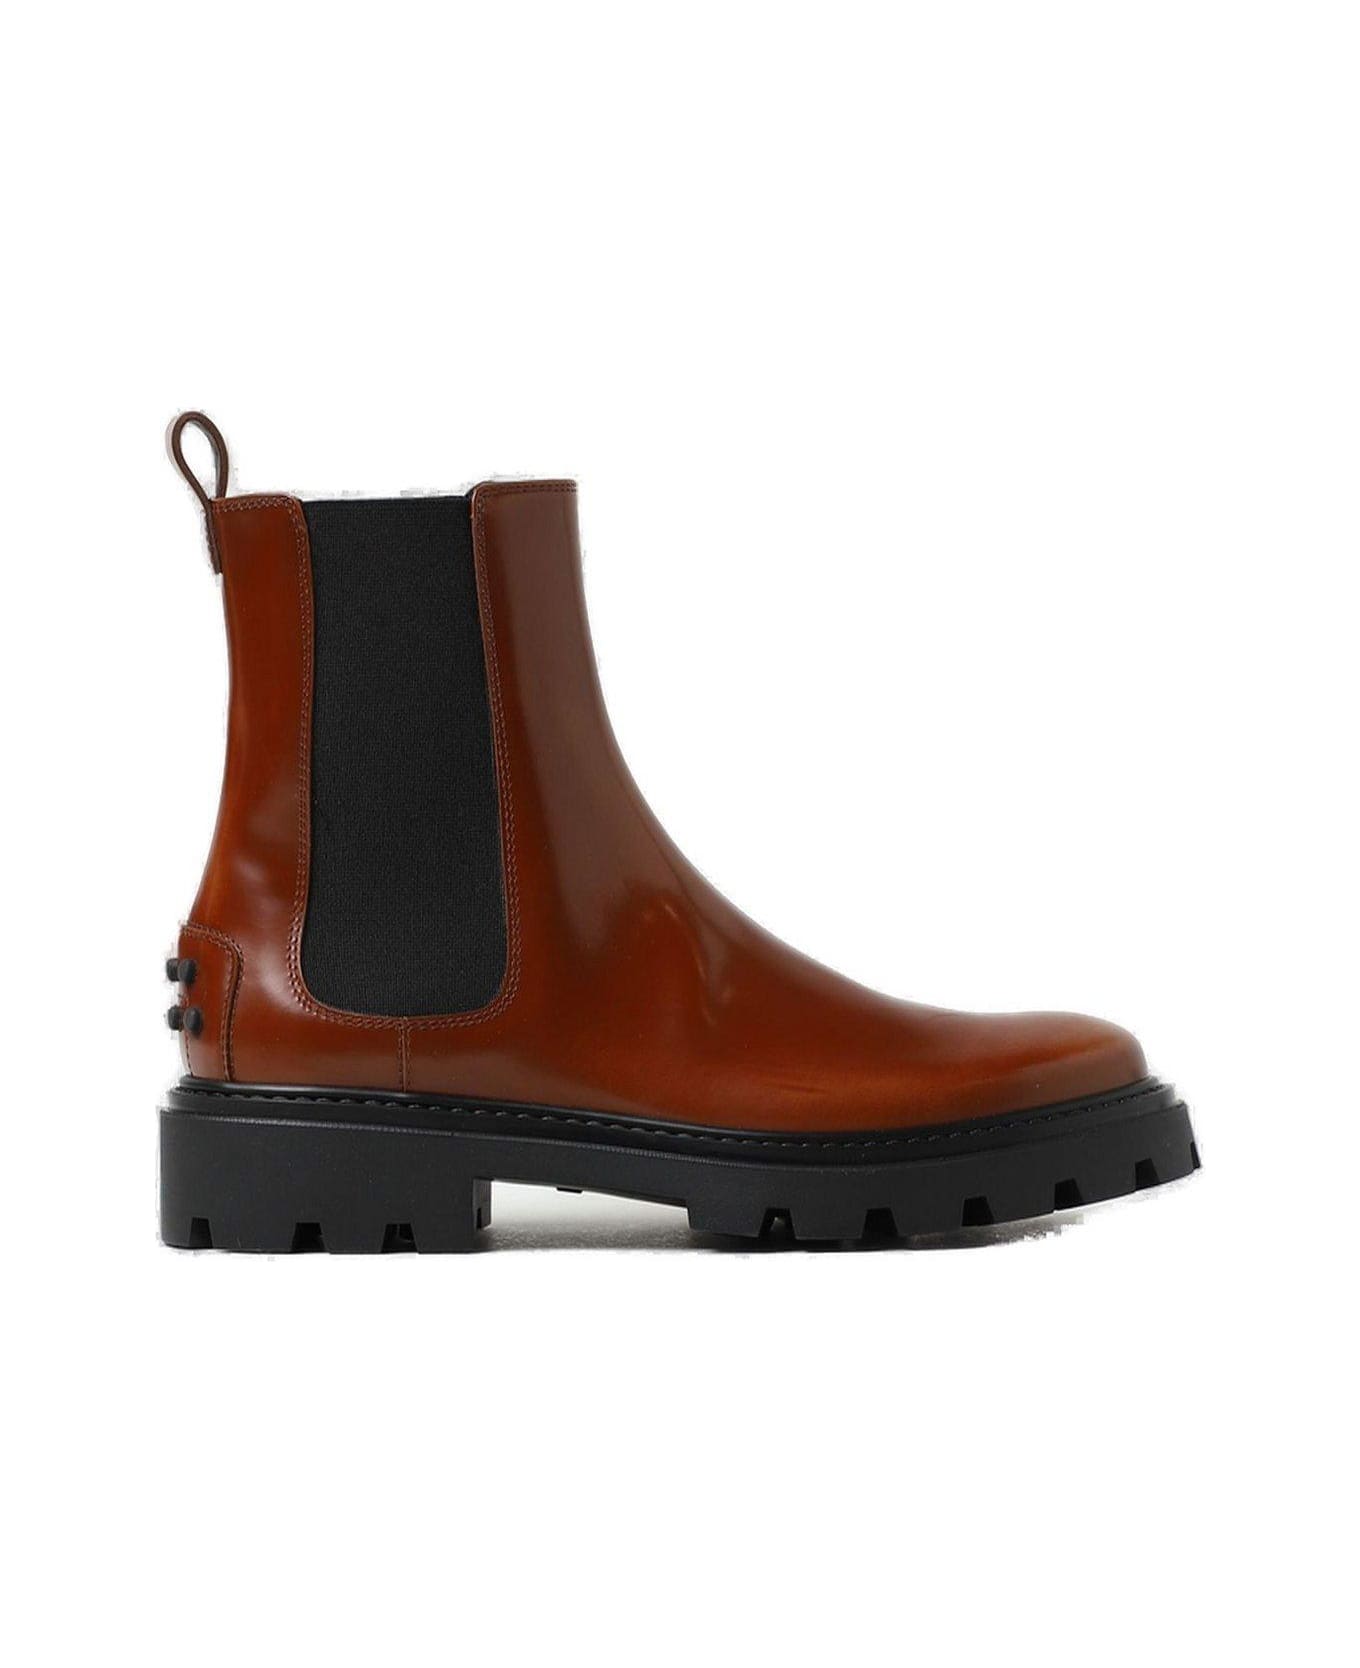 Tod's Studded Round Toe Chelsea Boots - Brown